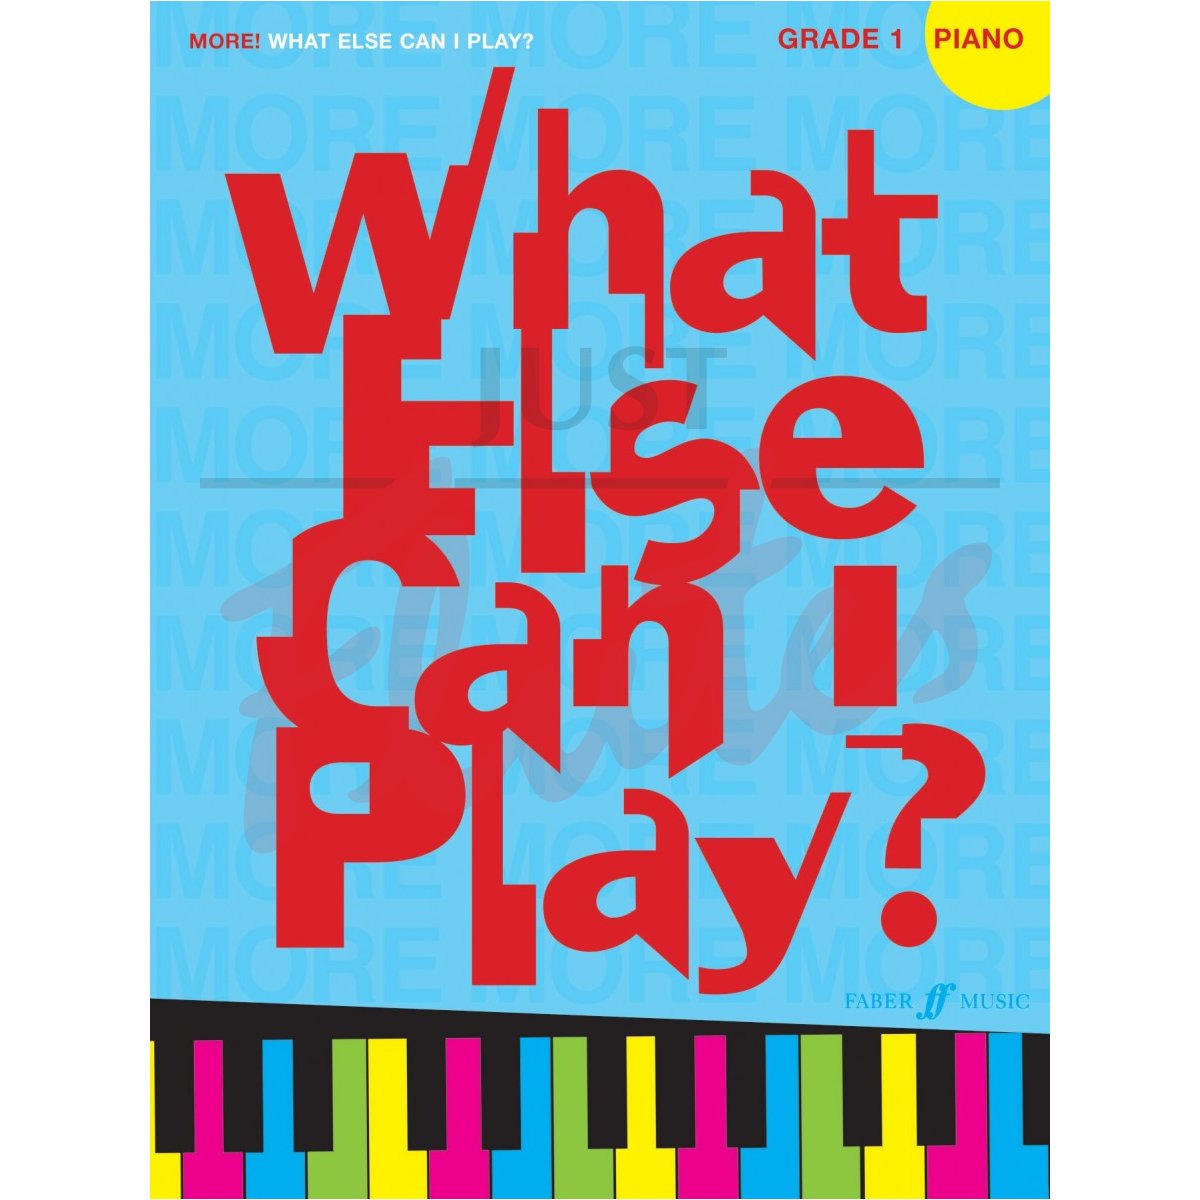 More What Else Can I Play? Grade 1 for Piano